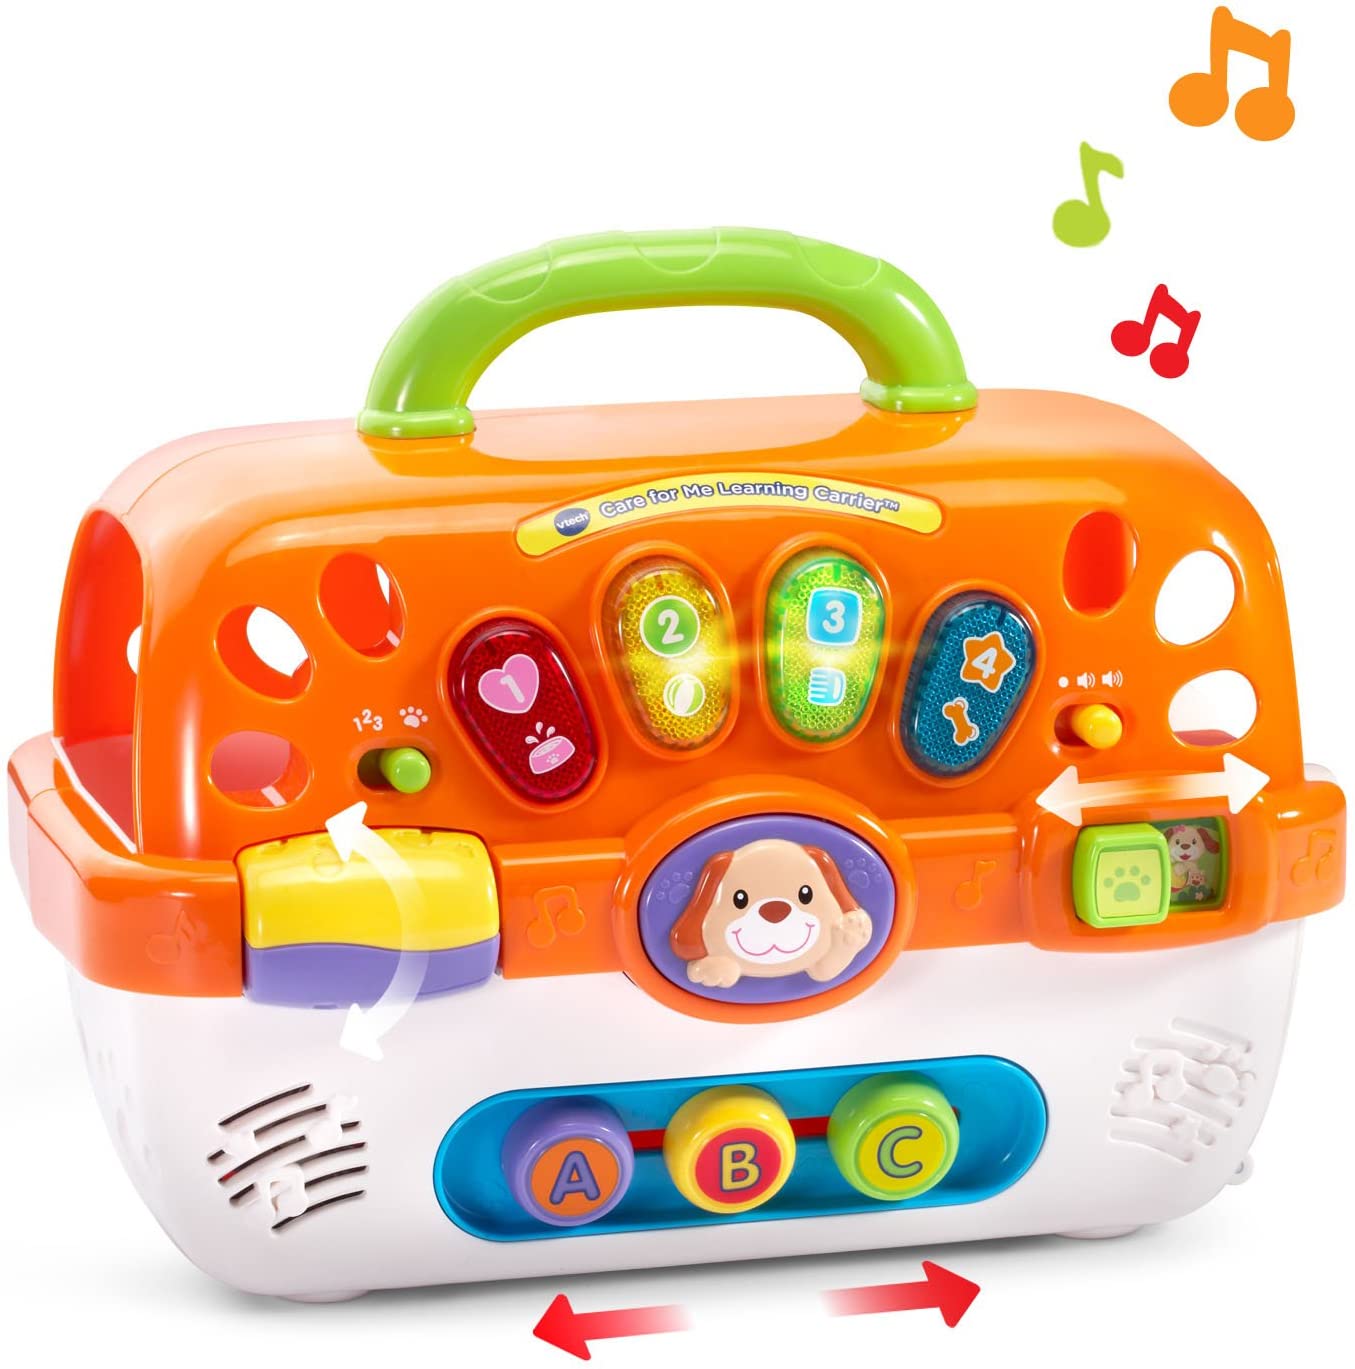 VTech Care for Me Learning Carrier, Orange - Features 100+ songs, melodies, sounds and phrases